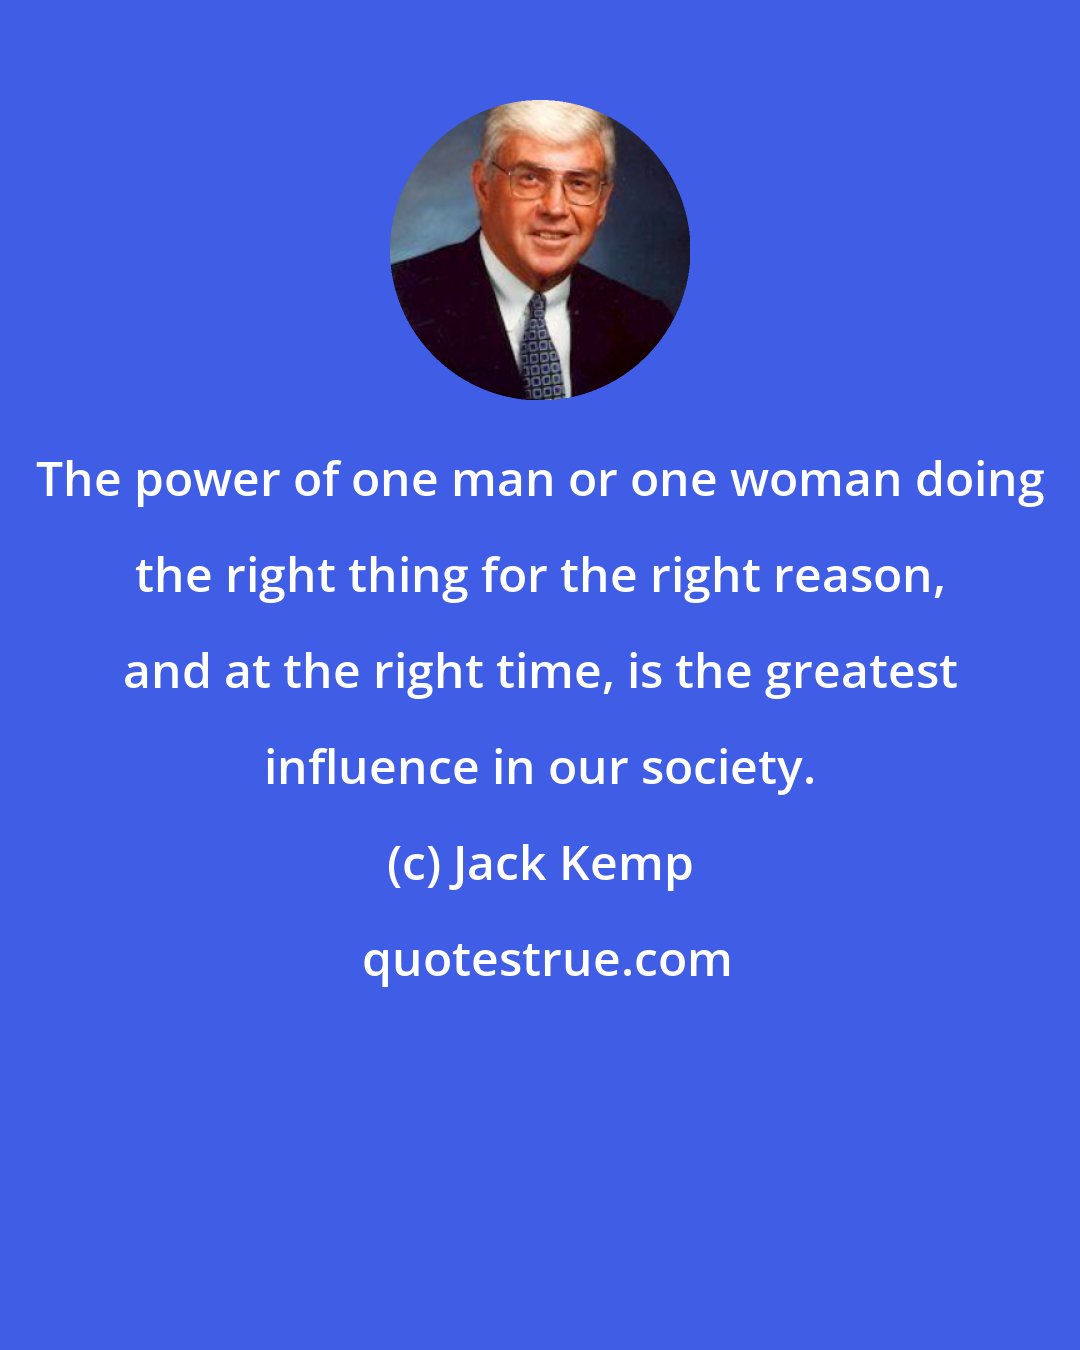 Jack Kemp: The power of one man or one woman doing the right thing for the right reason, and at the right time, is the greatest influence in our society.